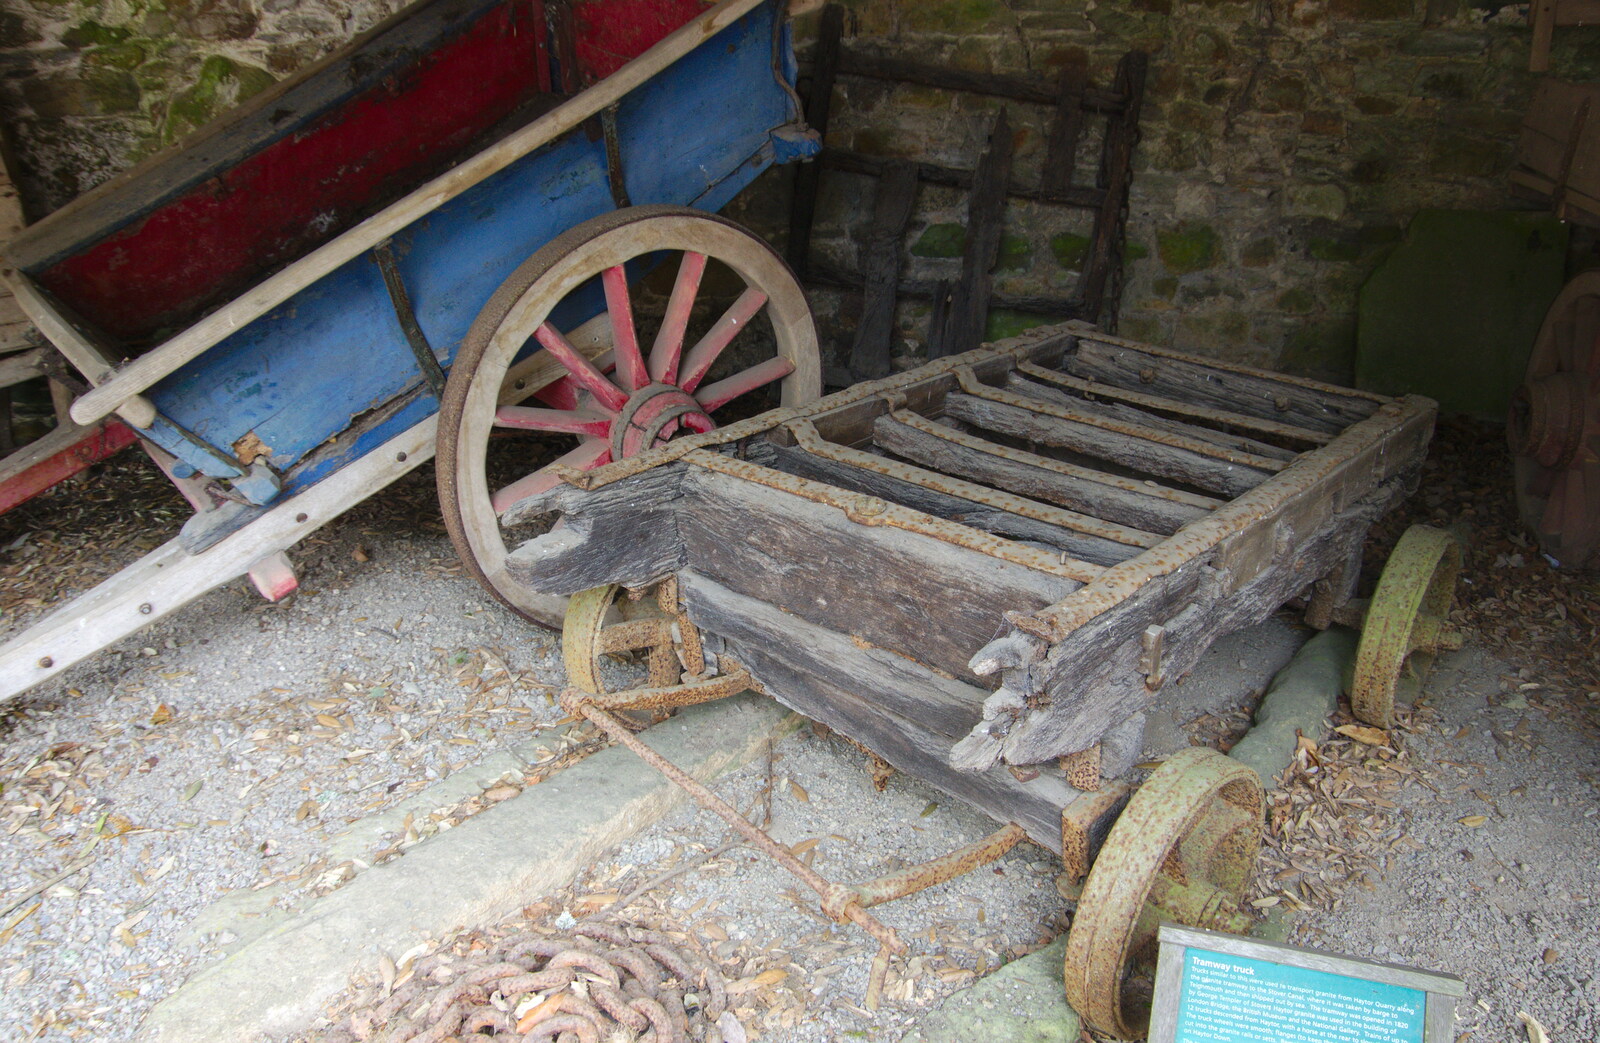 Chagford Lido and a Trip to Parke, Bovey Tracey, Devon - 25th May 2019: An ancient trolley or cart